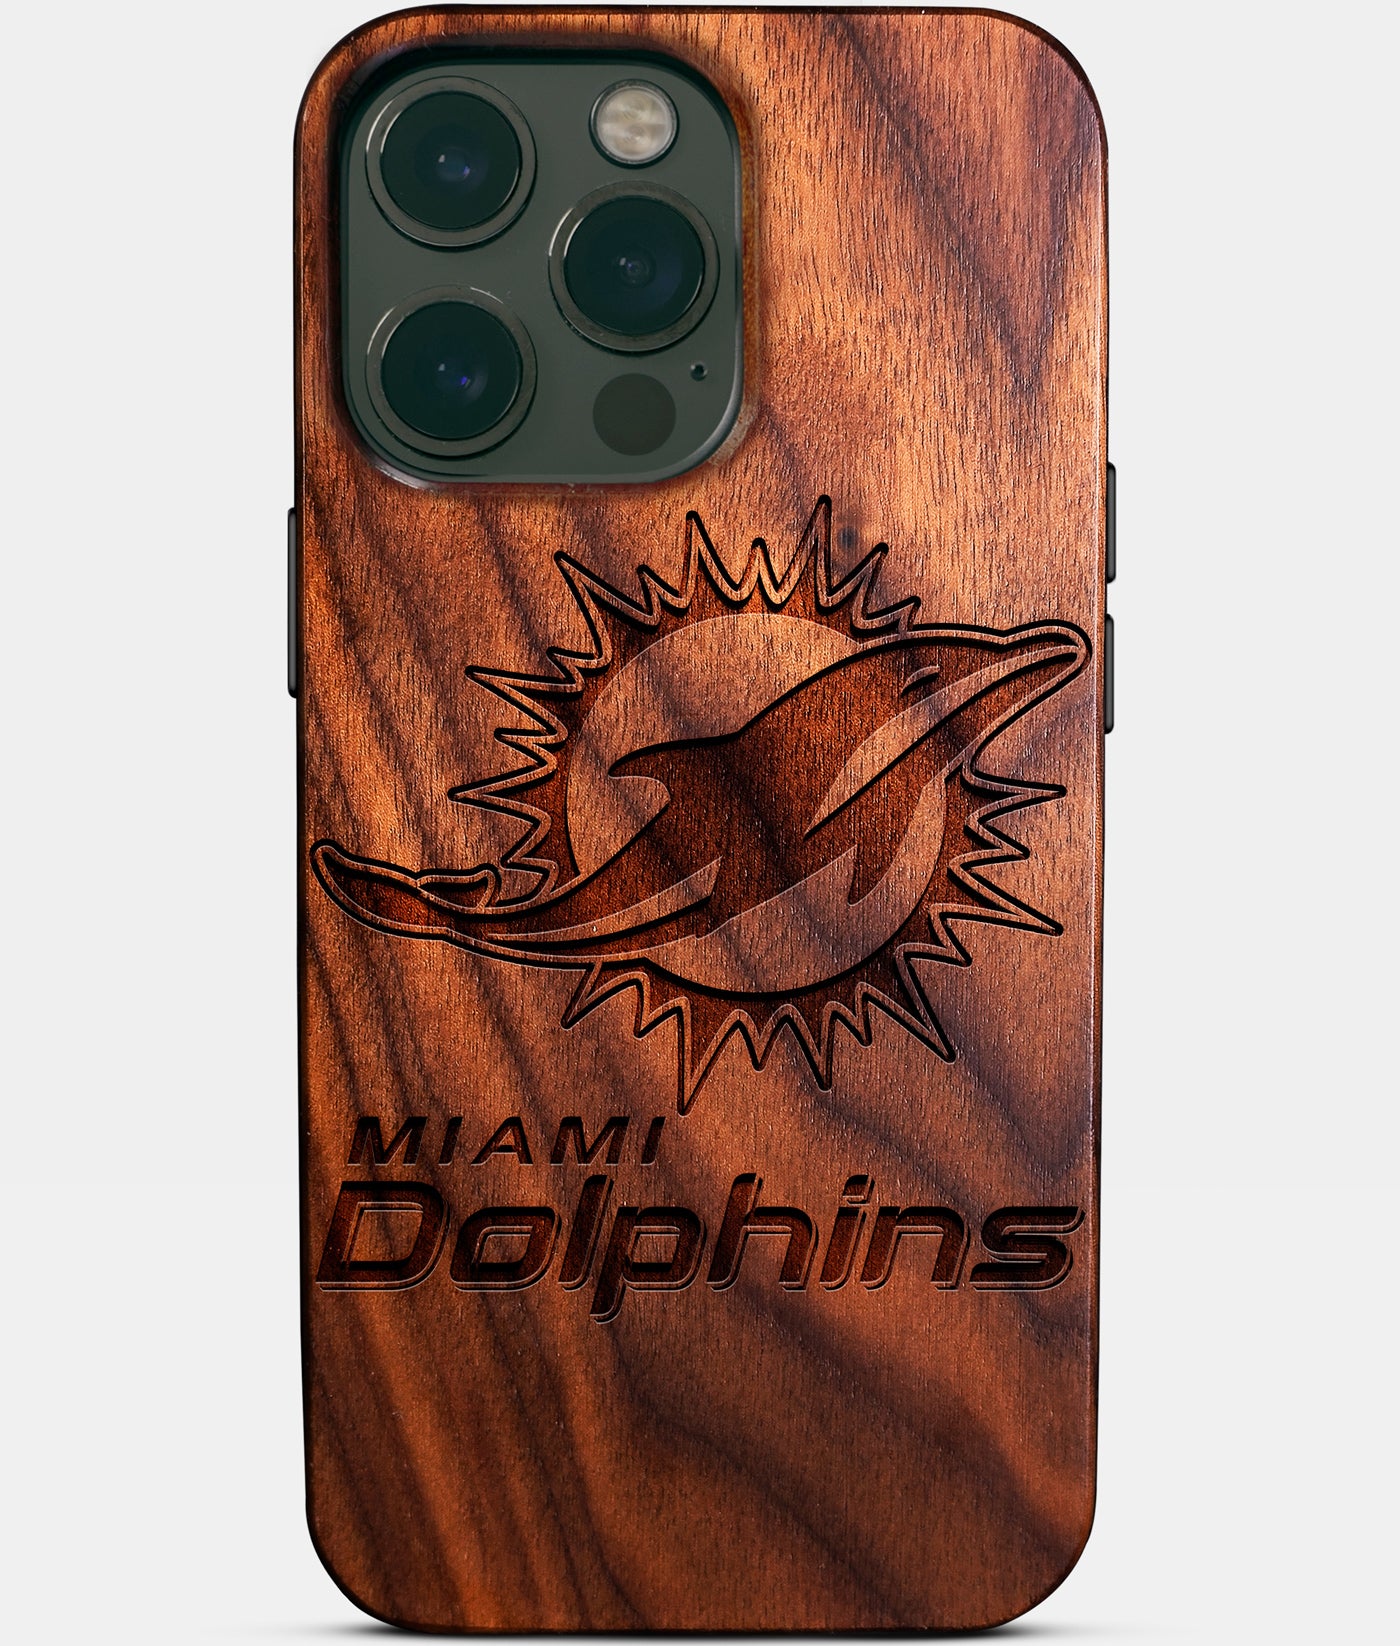 Custom Miami Dolphins iPhone 14/14 Pro/14 Pro Max/14 Plus Case - Carved Wood Dolphins Cover - Eco-friendly Miami Dolphins iPhone 14 Case - Custom Miami Dolphins Gift For Him - Monogrammed Personalized iPhone 14 Cover By Engraved In Nature